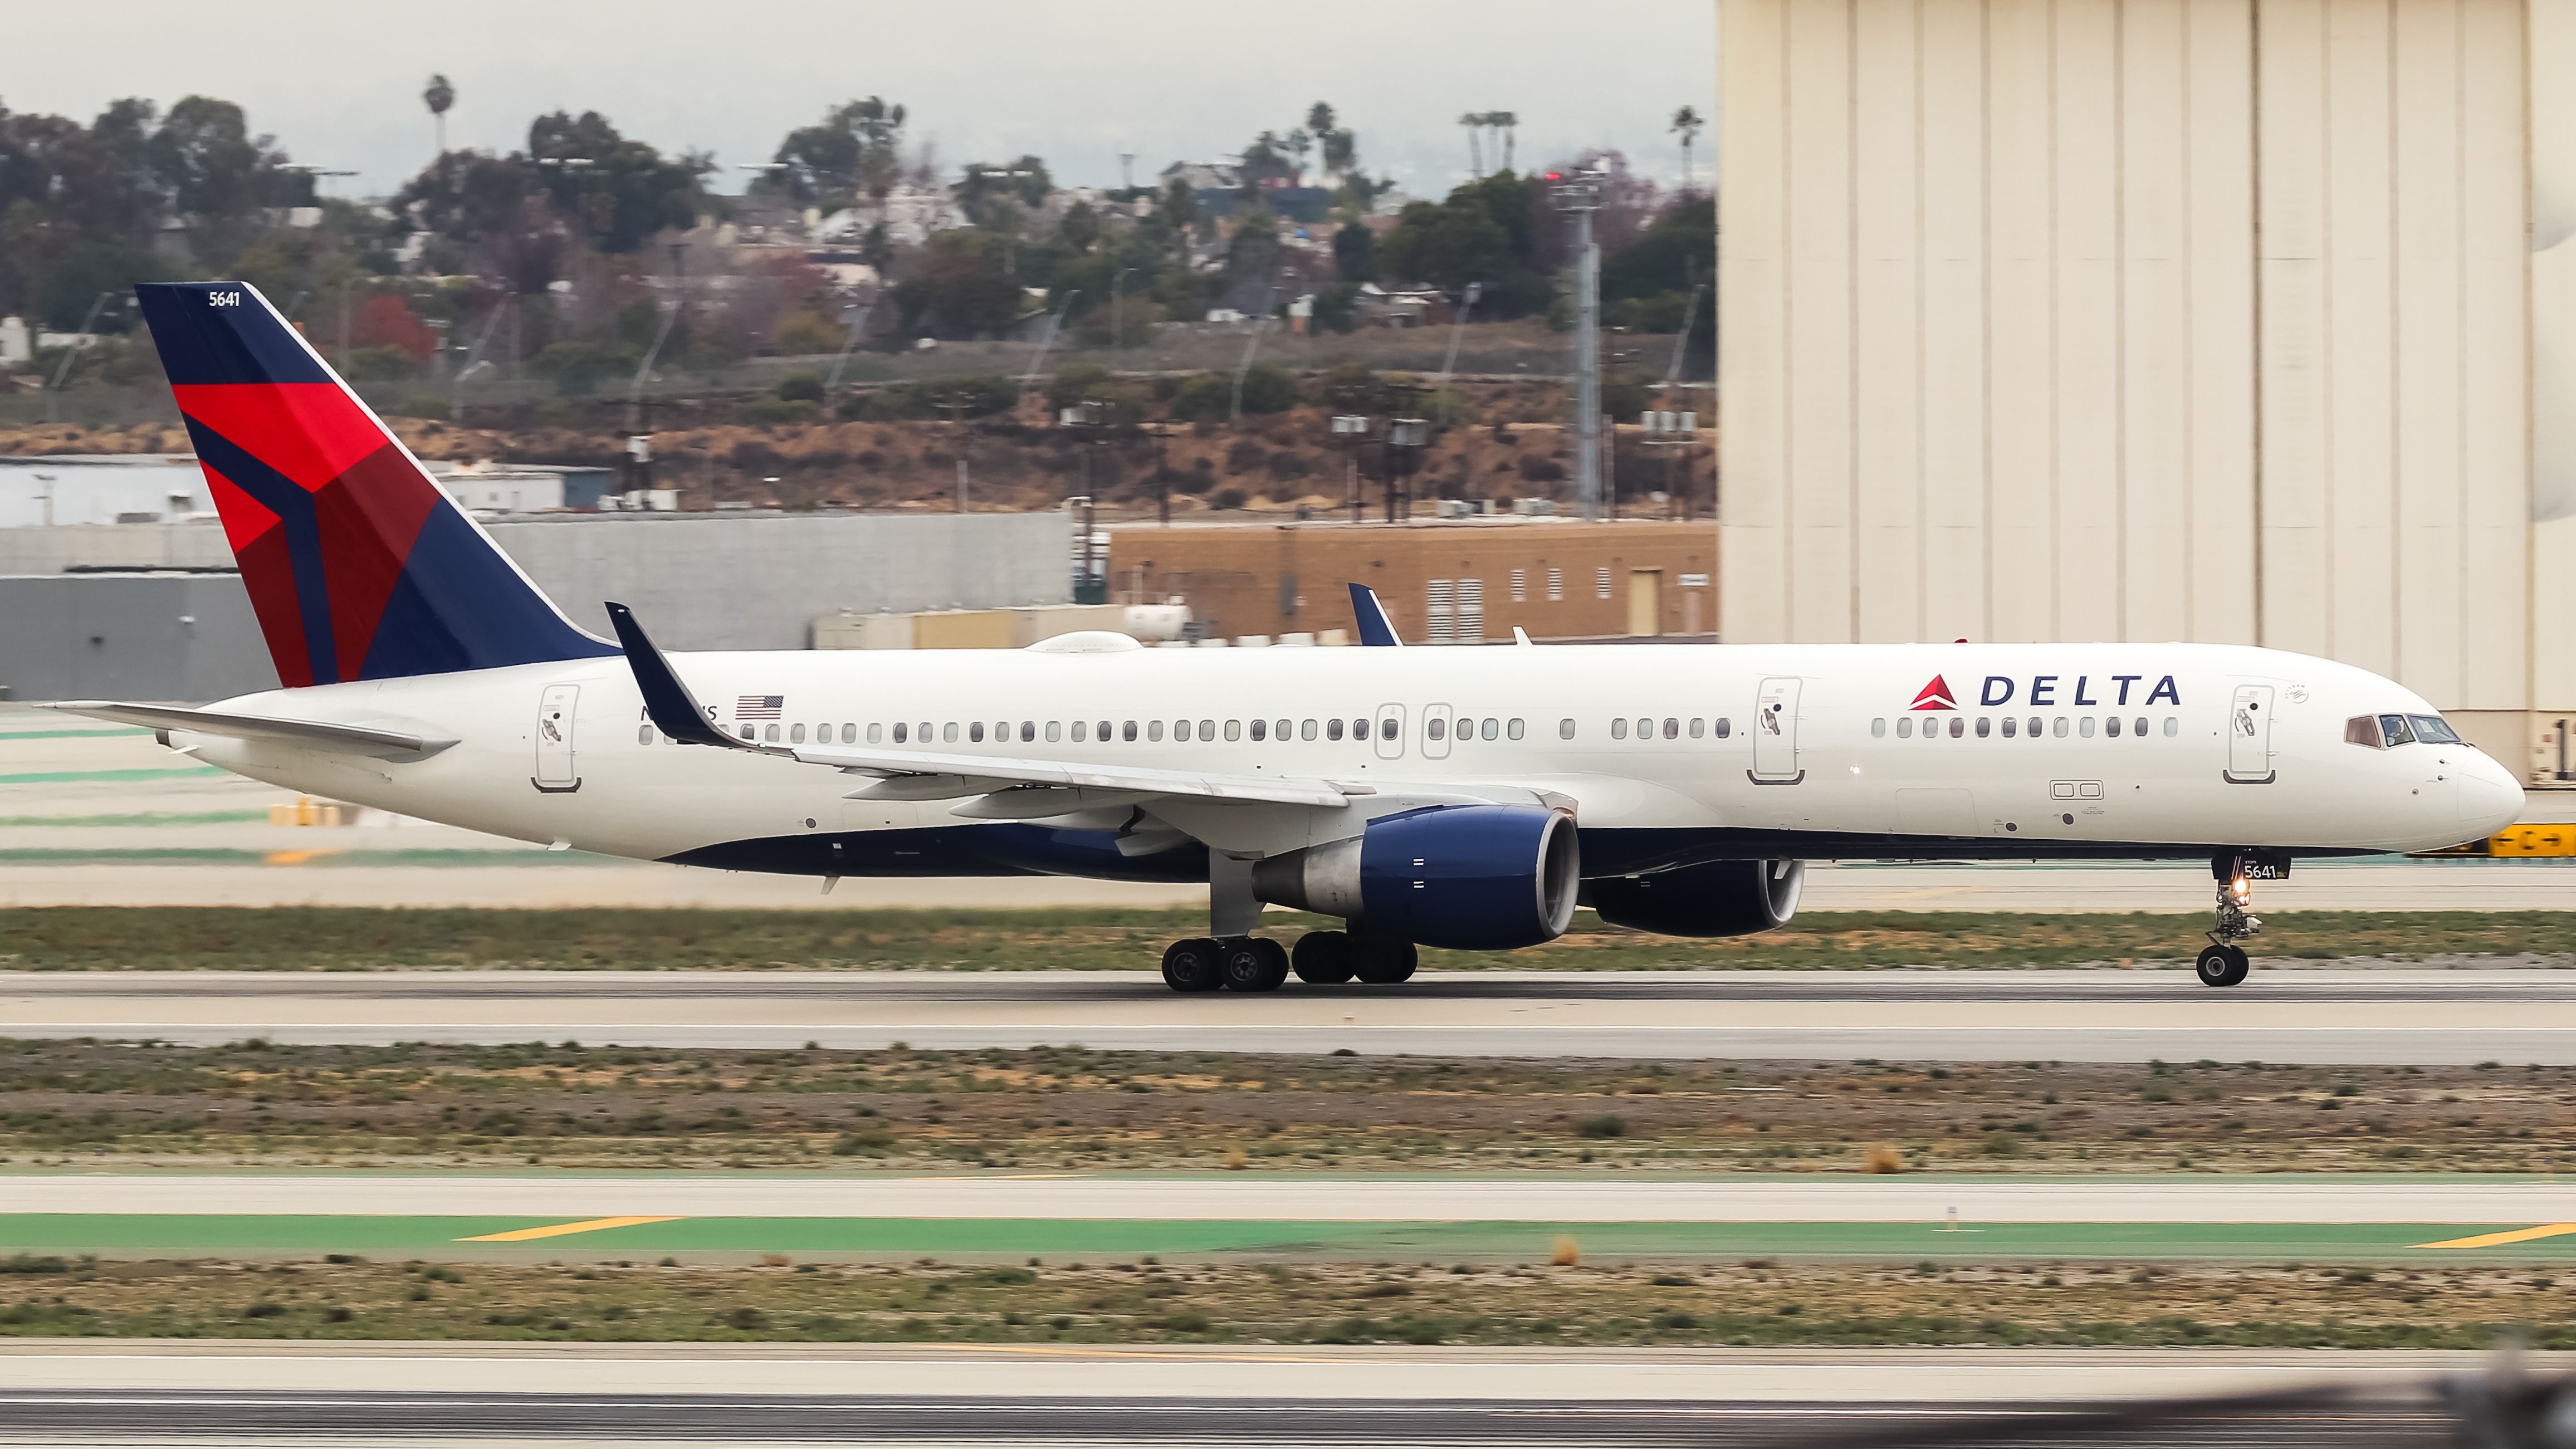 Delta Air Lines Boeing 757-200 at Los Angeles International Airport.